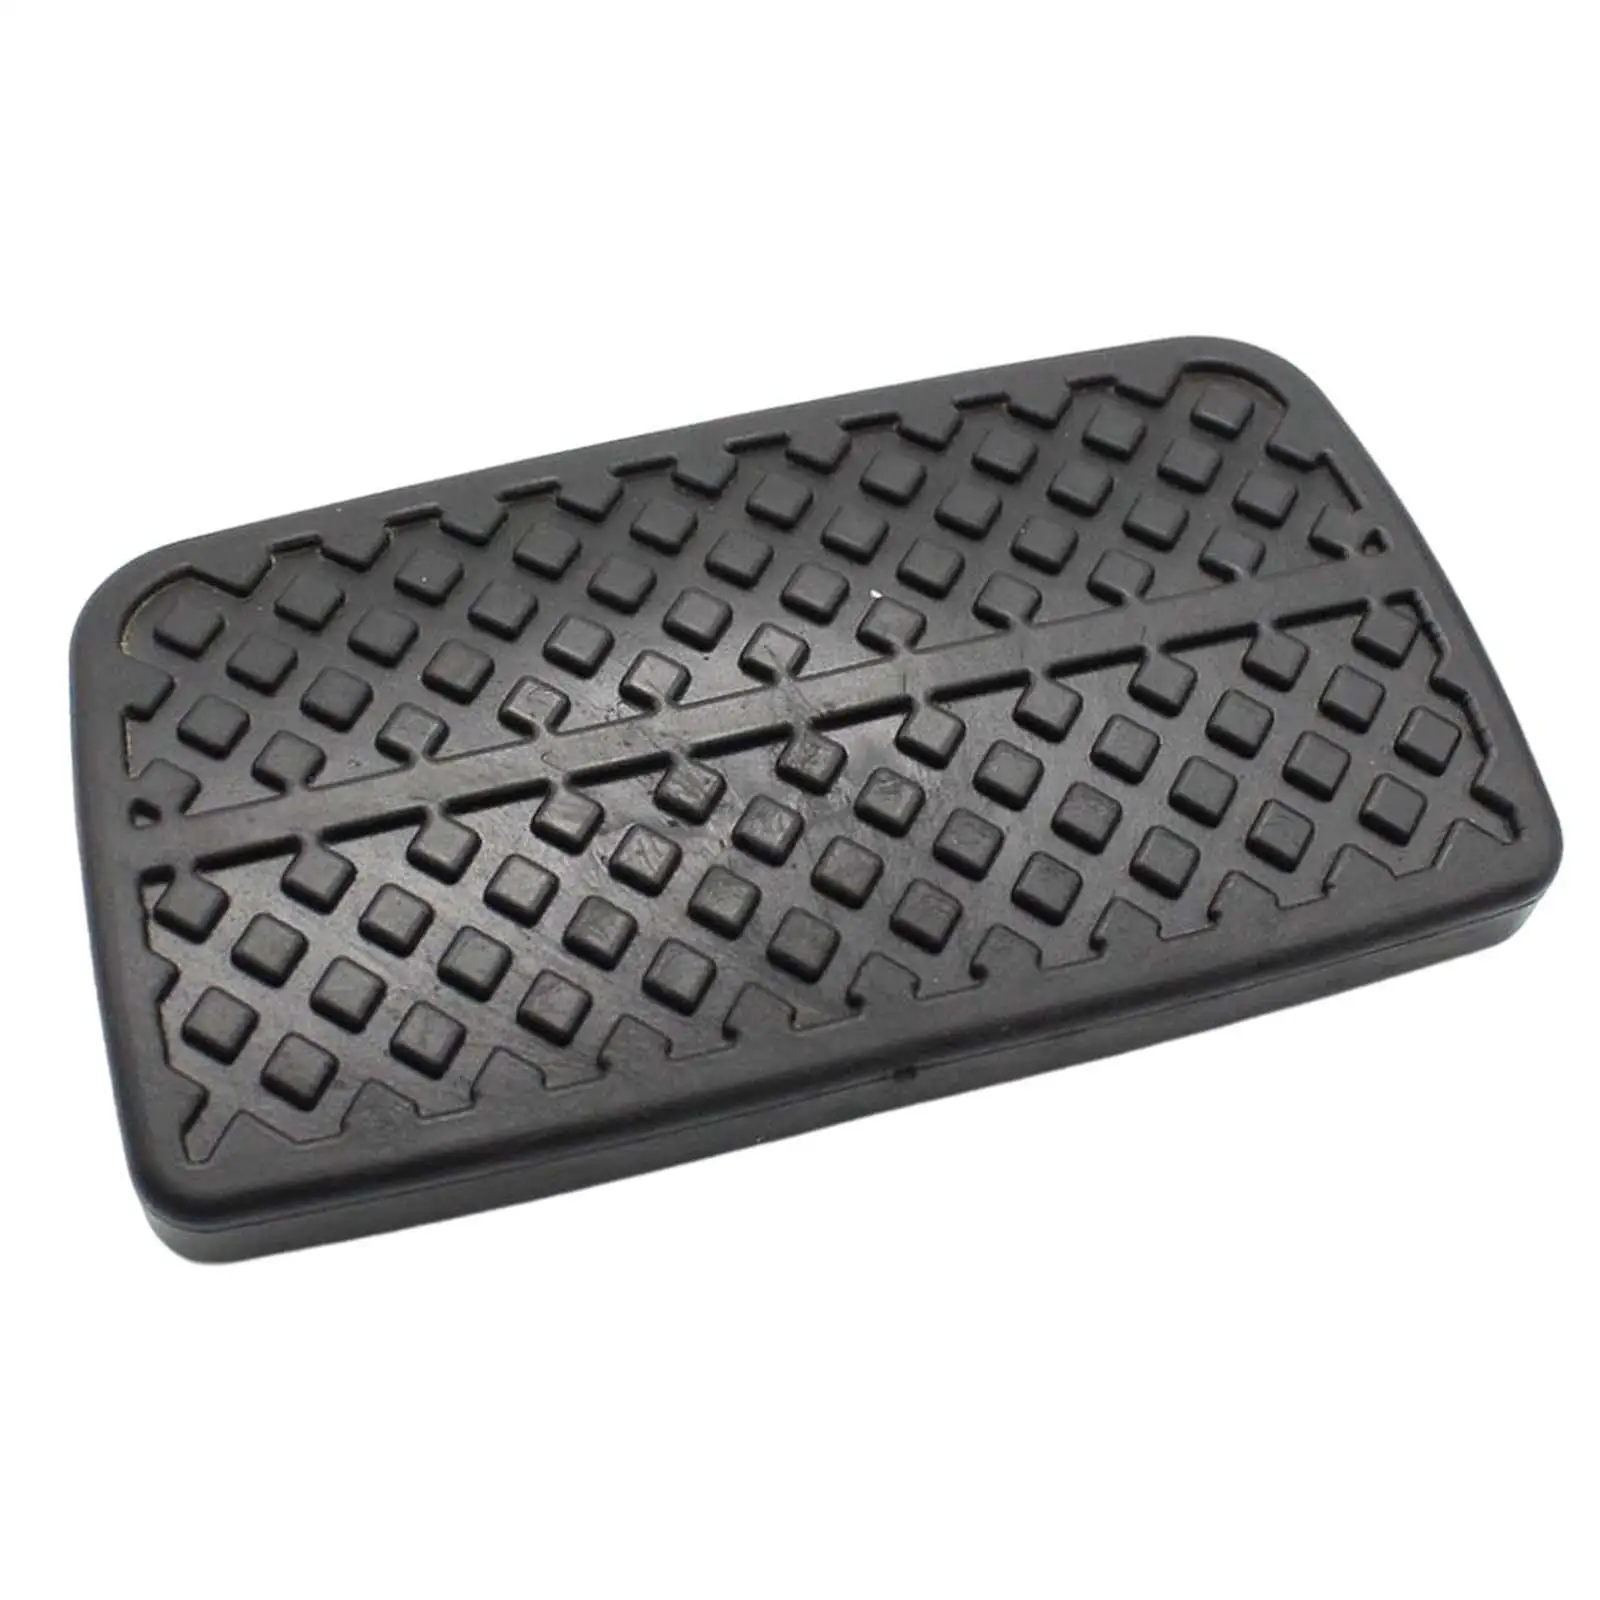 Auto Brake Clutch Pedal Rubber Pad 46545-s1F-981 Replaces Durable for Honda Fit Jazz Sturdy Automobile Repairing Accessory